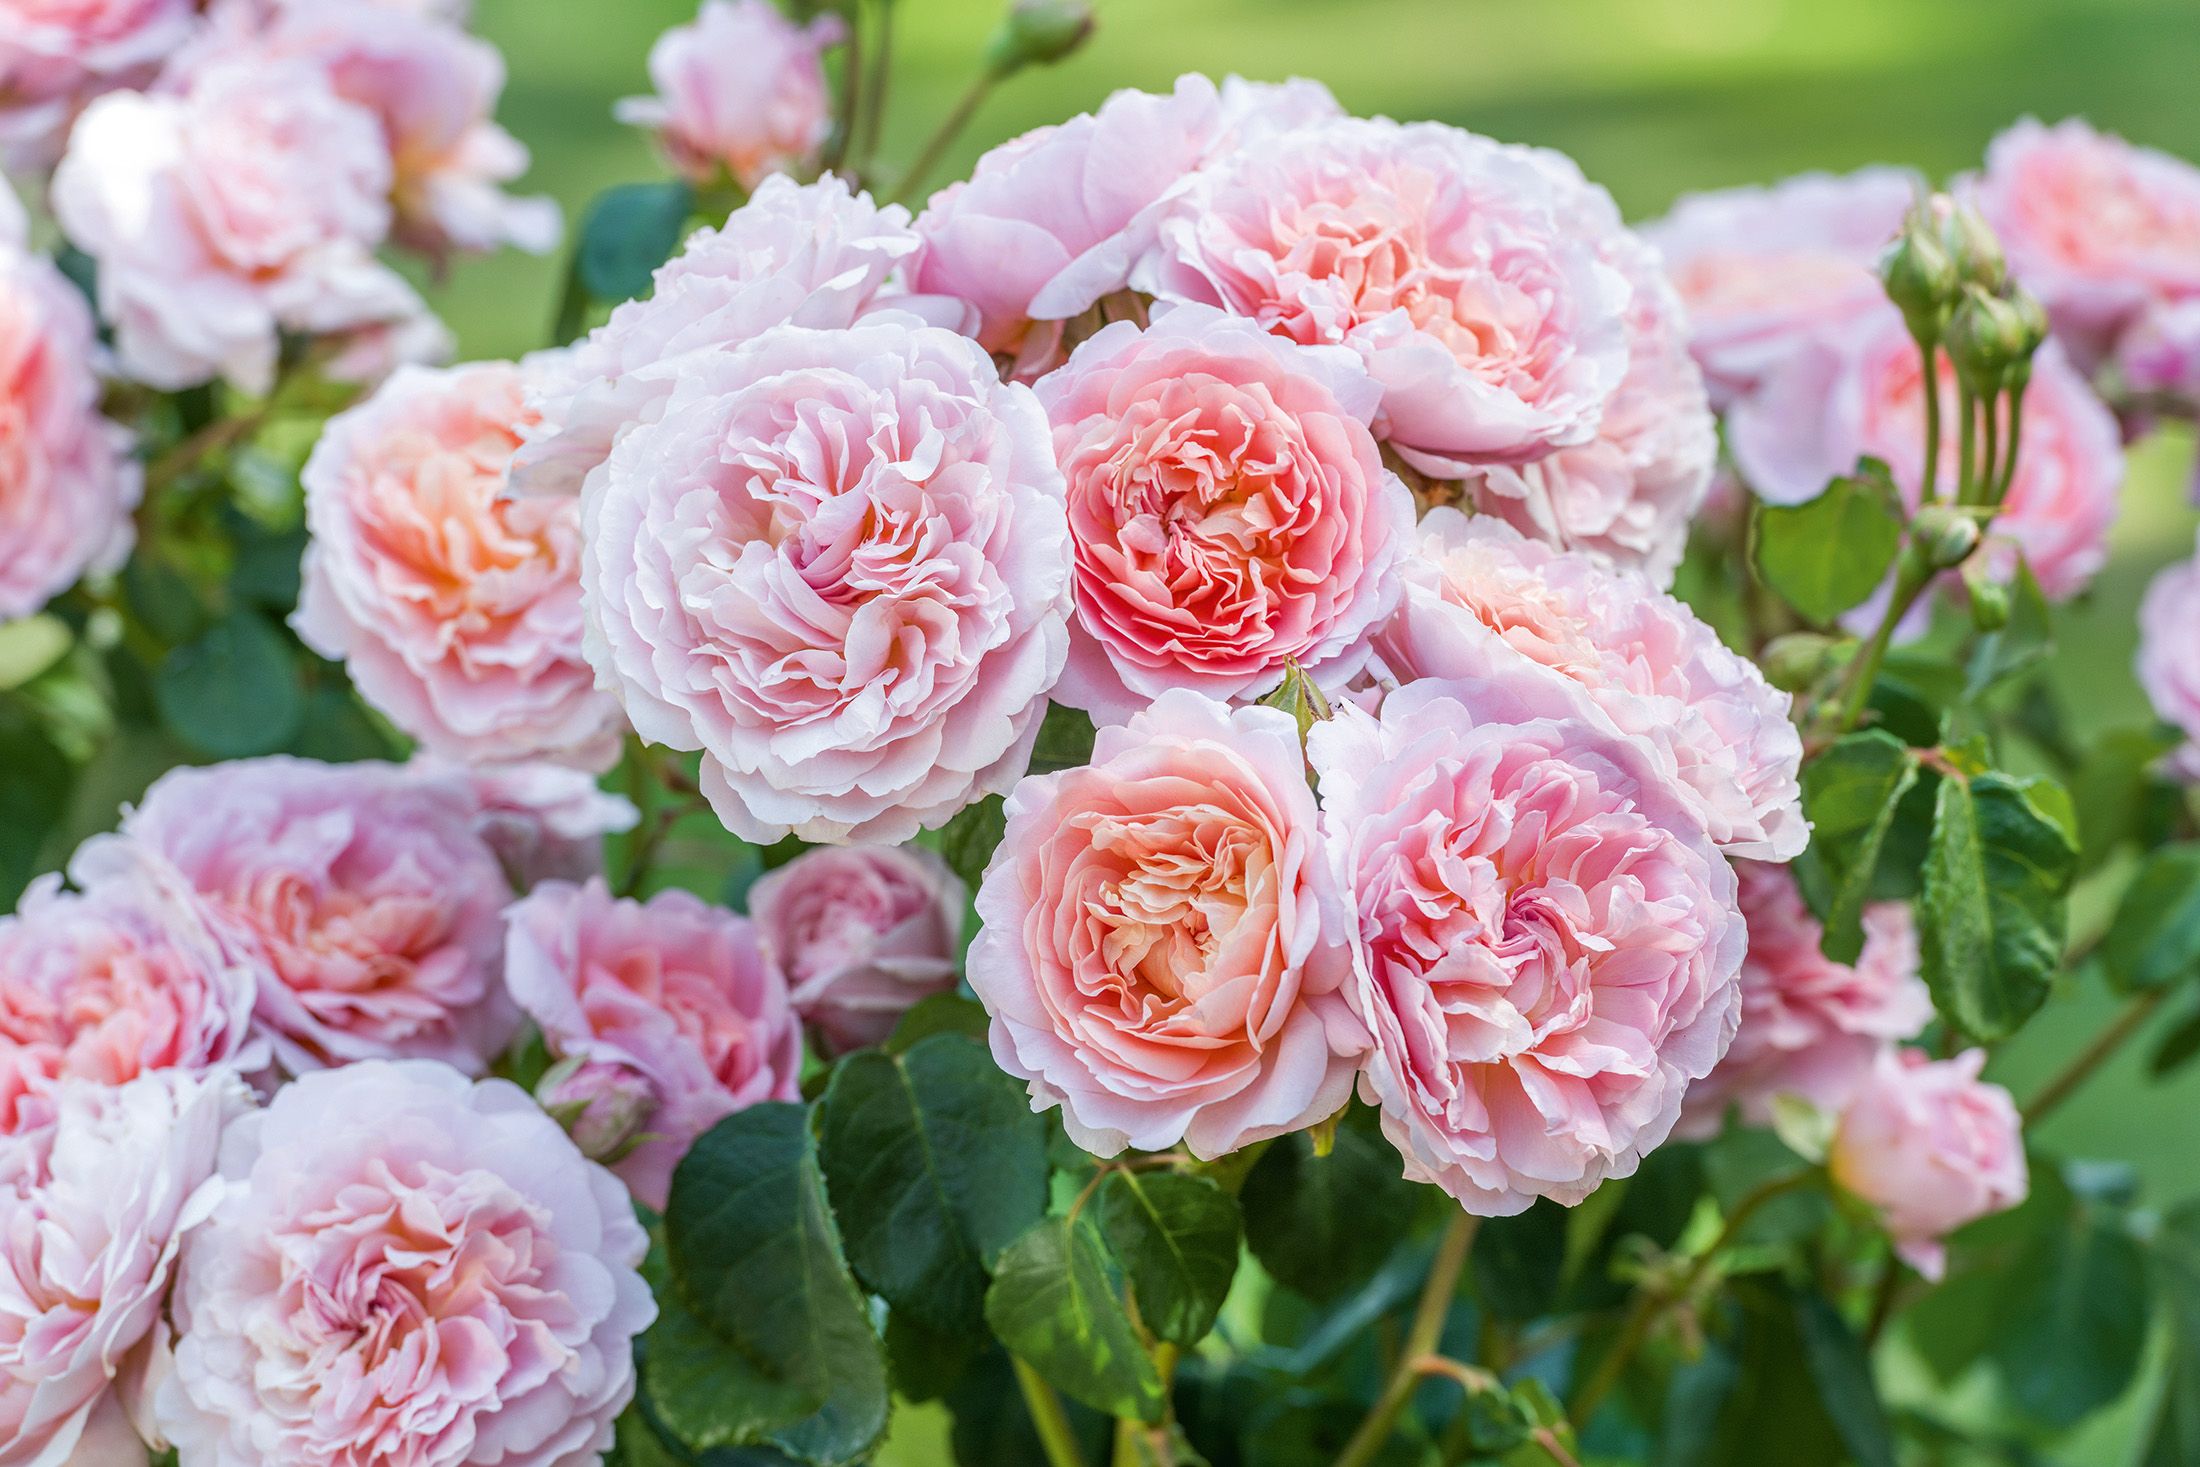 david austin will showcase beautiful new blooms at this year's